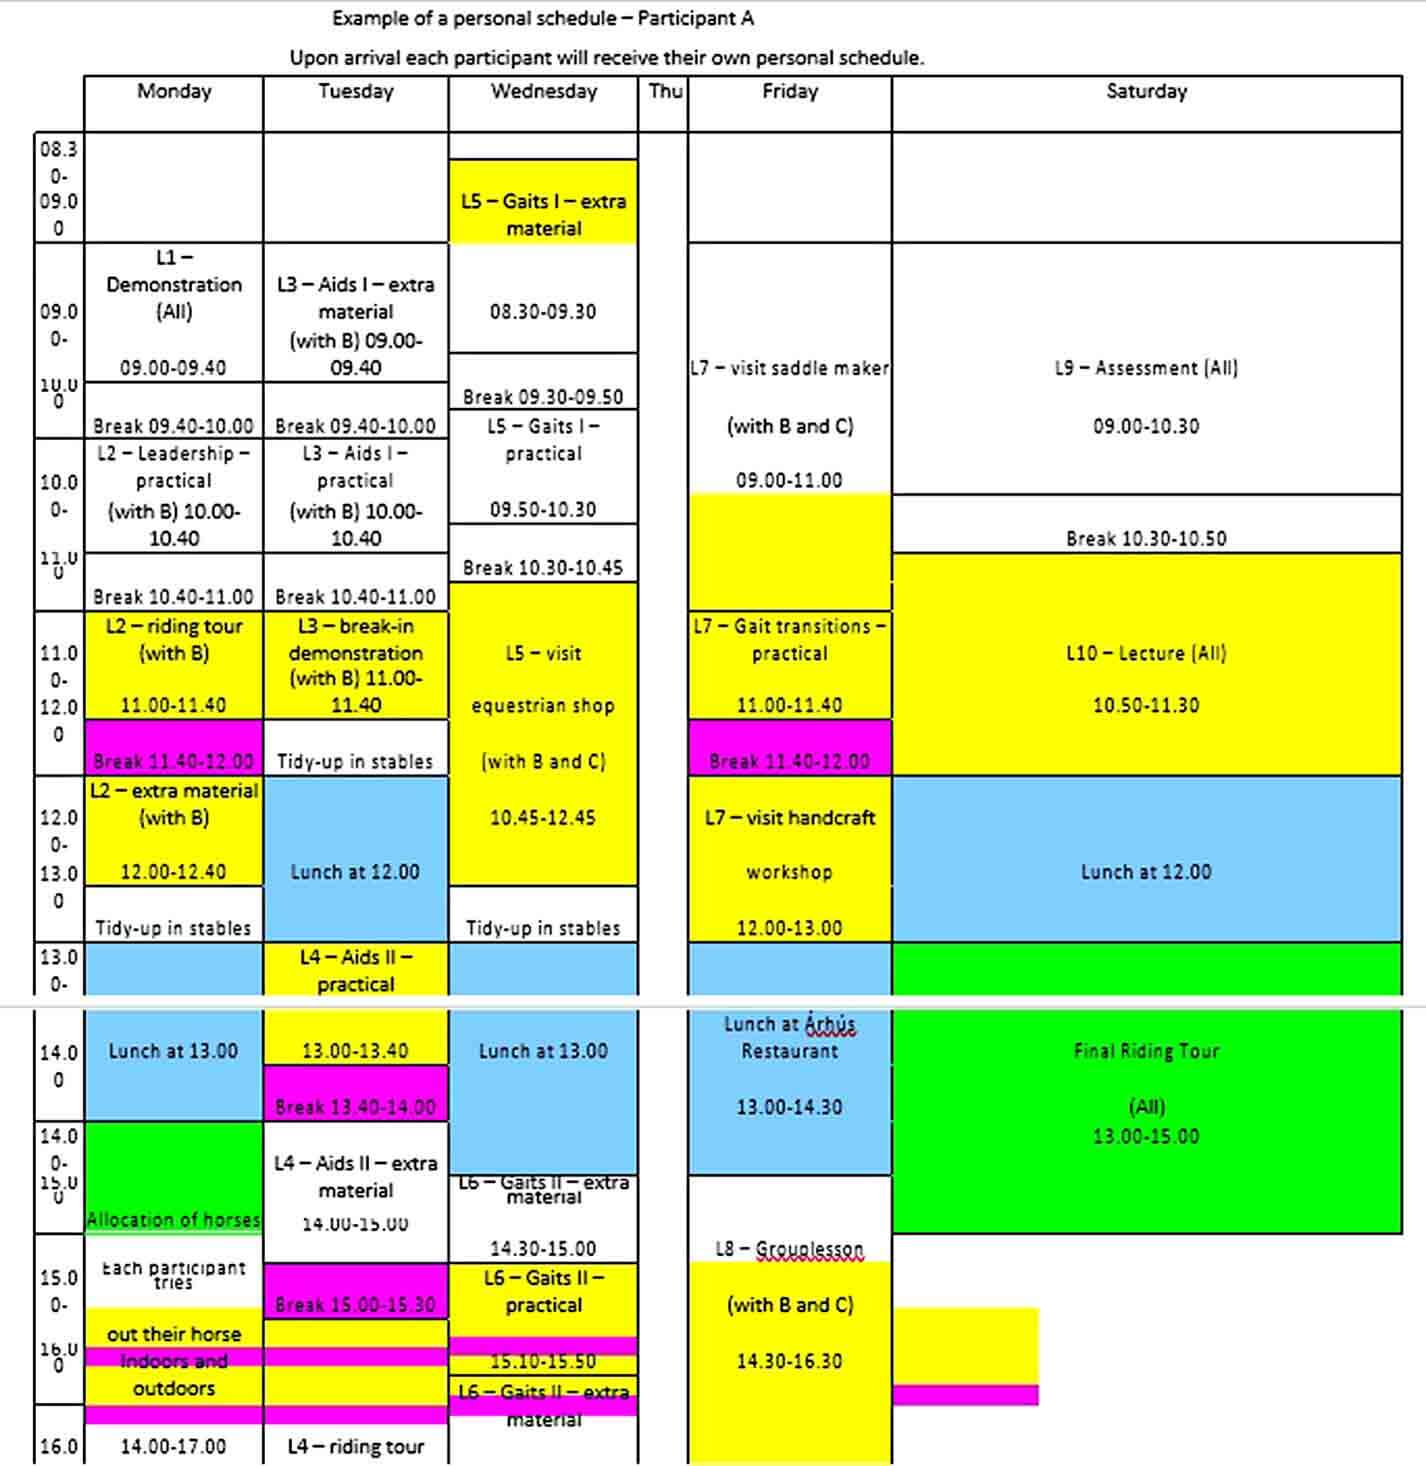 Example Personal Schedule